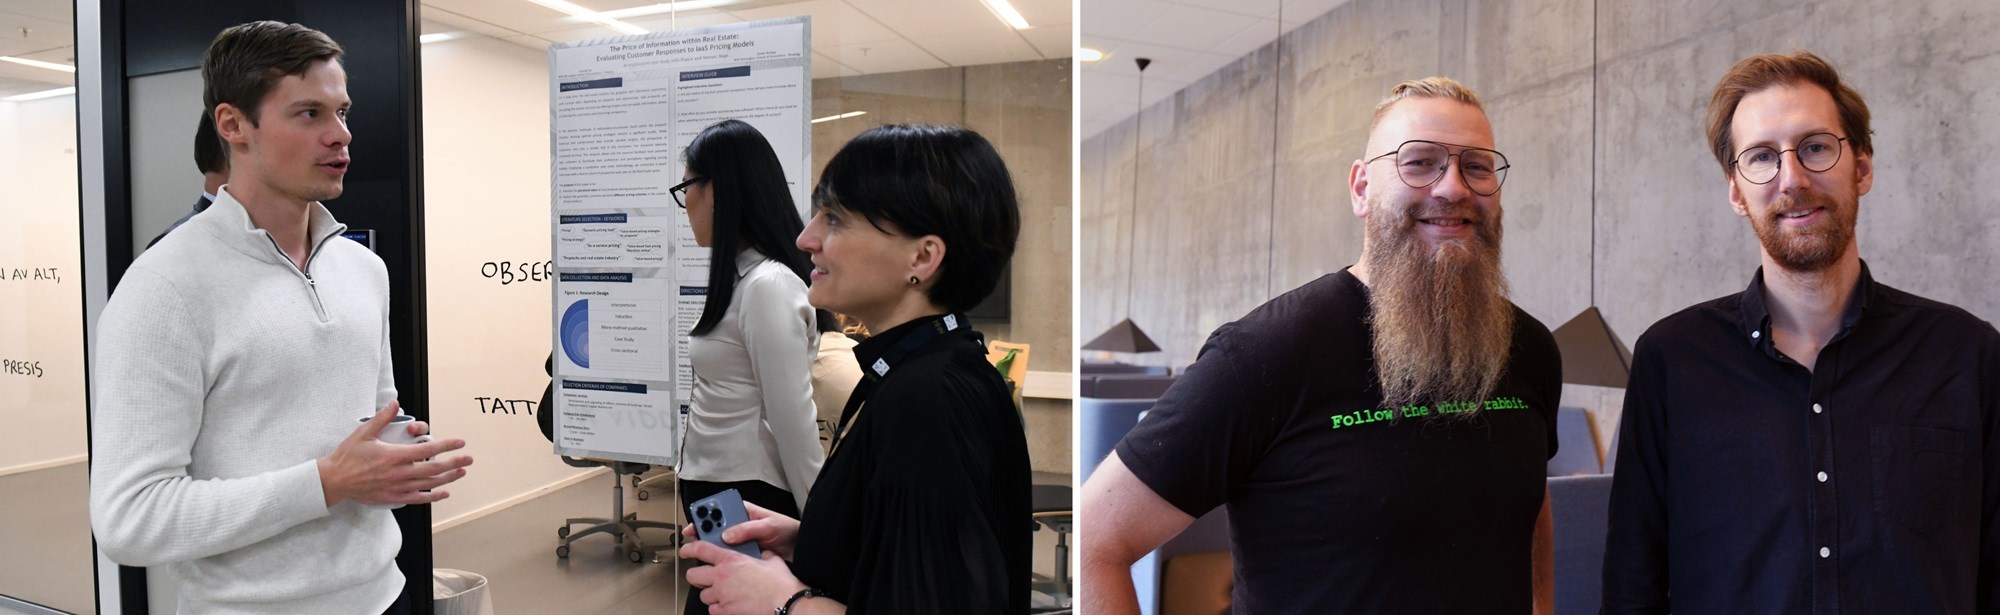 Ieva Martinkenaite, Director Telenor Research and Innovation, met the NHH master students Simen Kufaas and Luying Yao at their poster session during DIG Summit 2023. To the right: Leader at NewTechLab in DNB Yngvar Ugland and NHH Professor Eirik Sjåholm Knudsen. Photo: Sigrid Folkestad